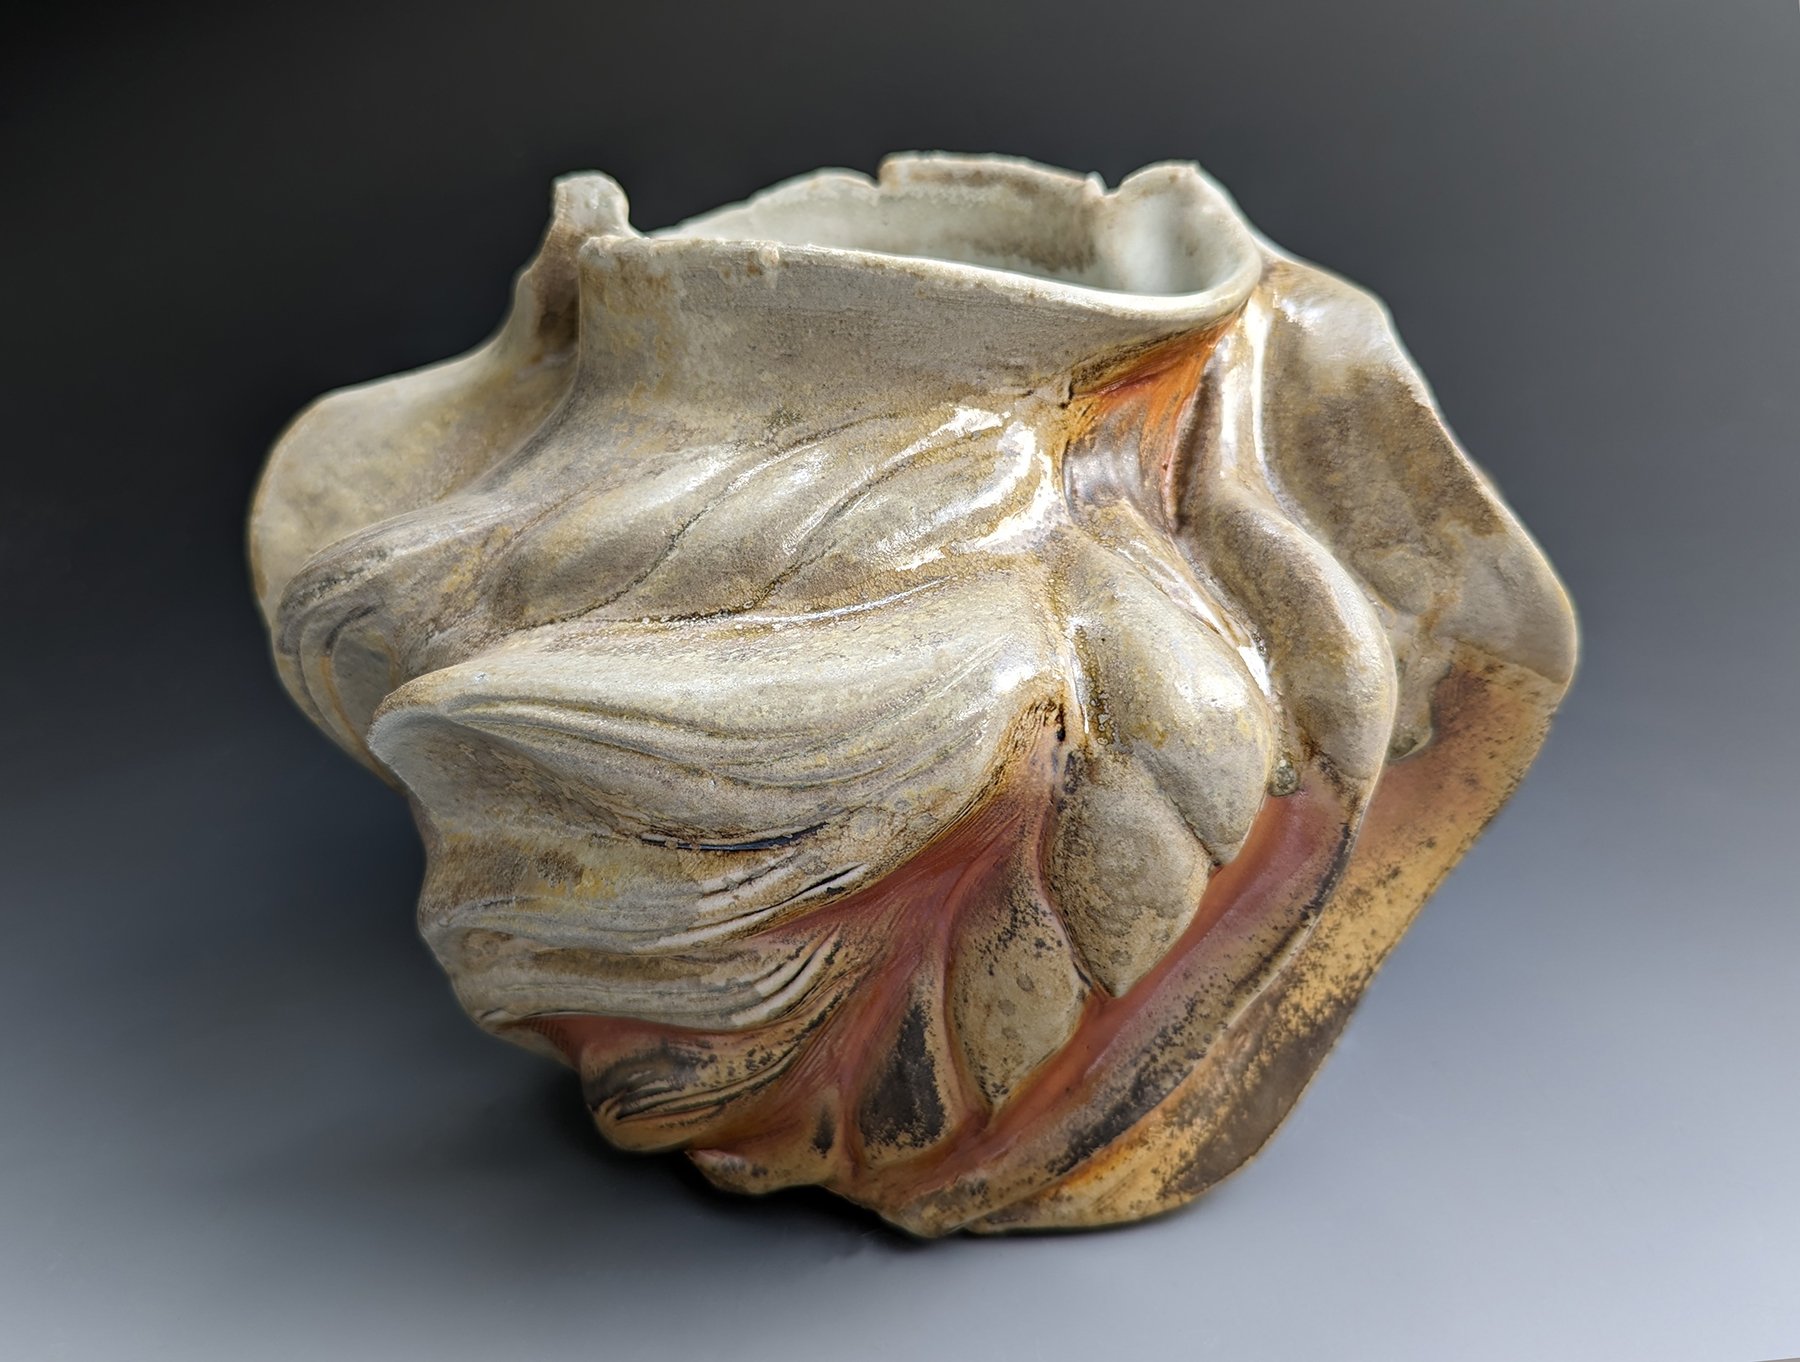    Ashy Wave Vase,   wood-fired ceramics, 8 x 10 x 8 inches 